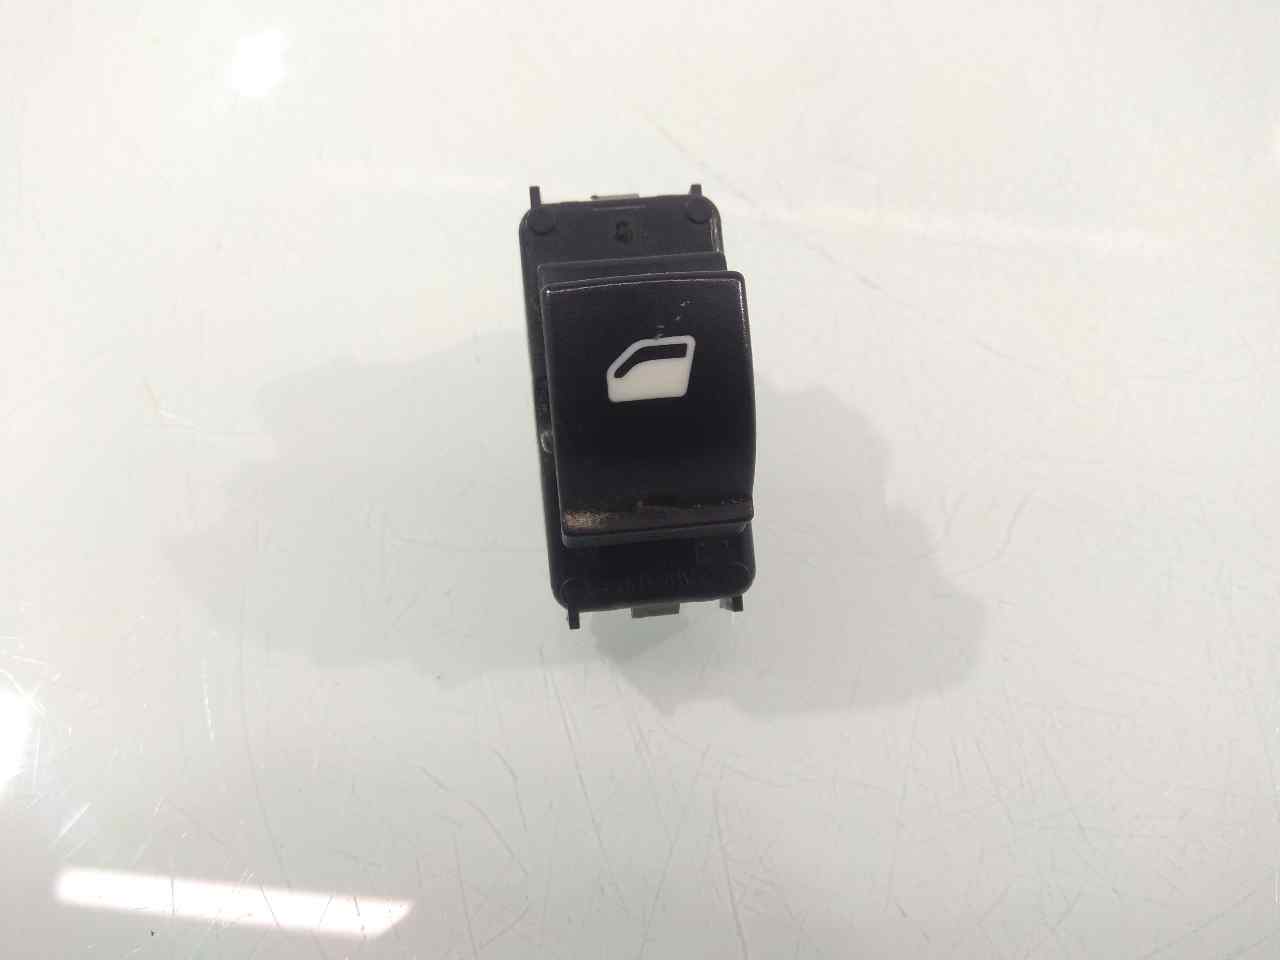 CITROËN C4 Picasso 2 generation (2013-2018) Rear Right Door Window Control Switch 96762292ZD 24406420